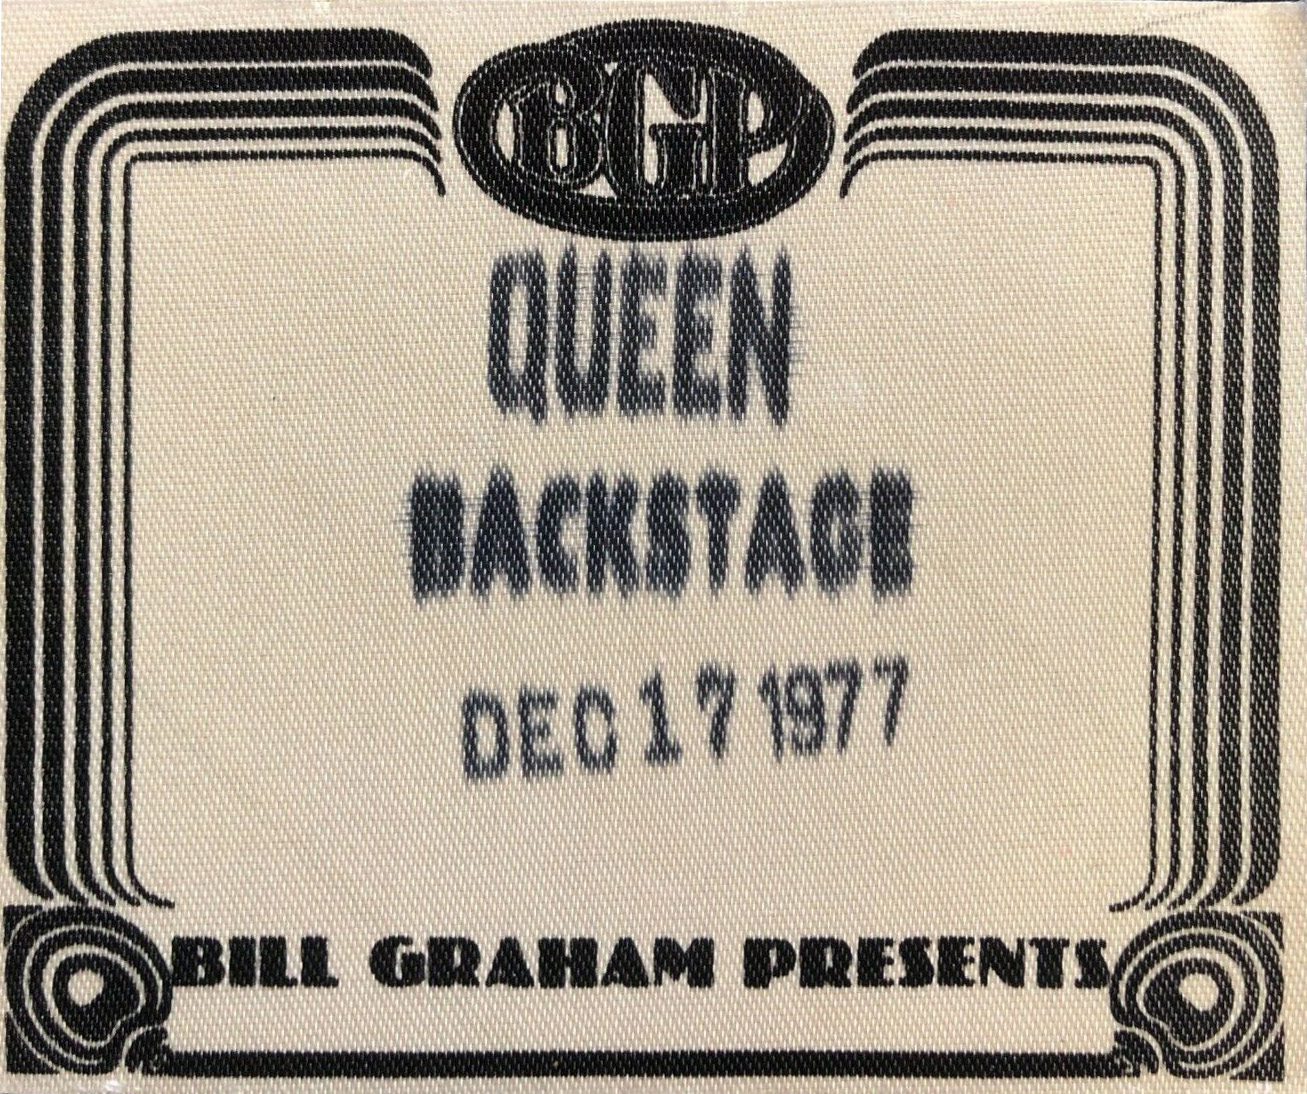 Backstage pass for the Queen concert in Oakland on 17.12.1977